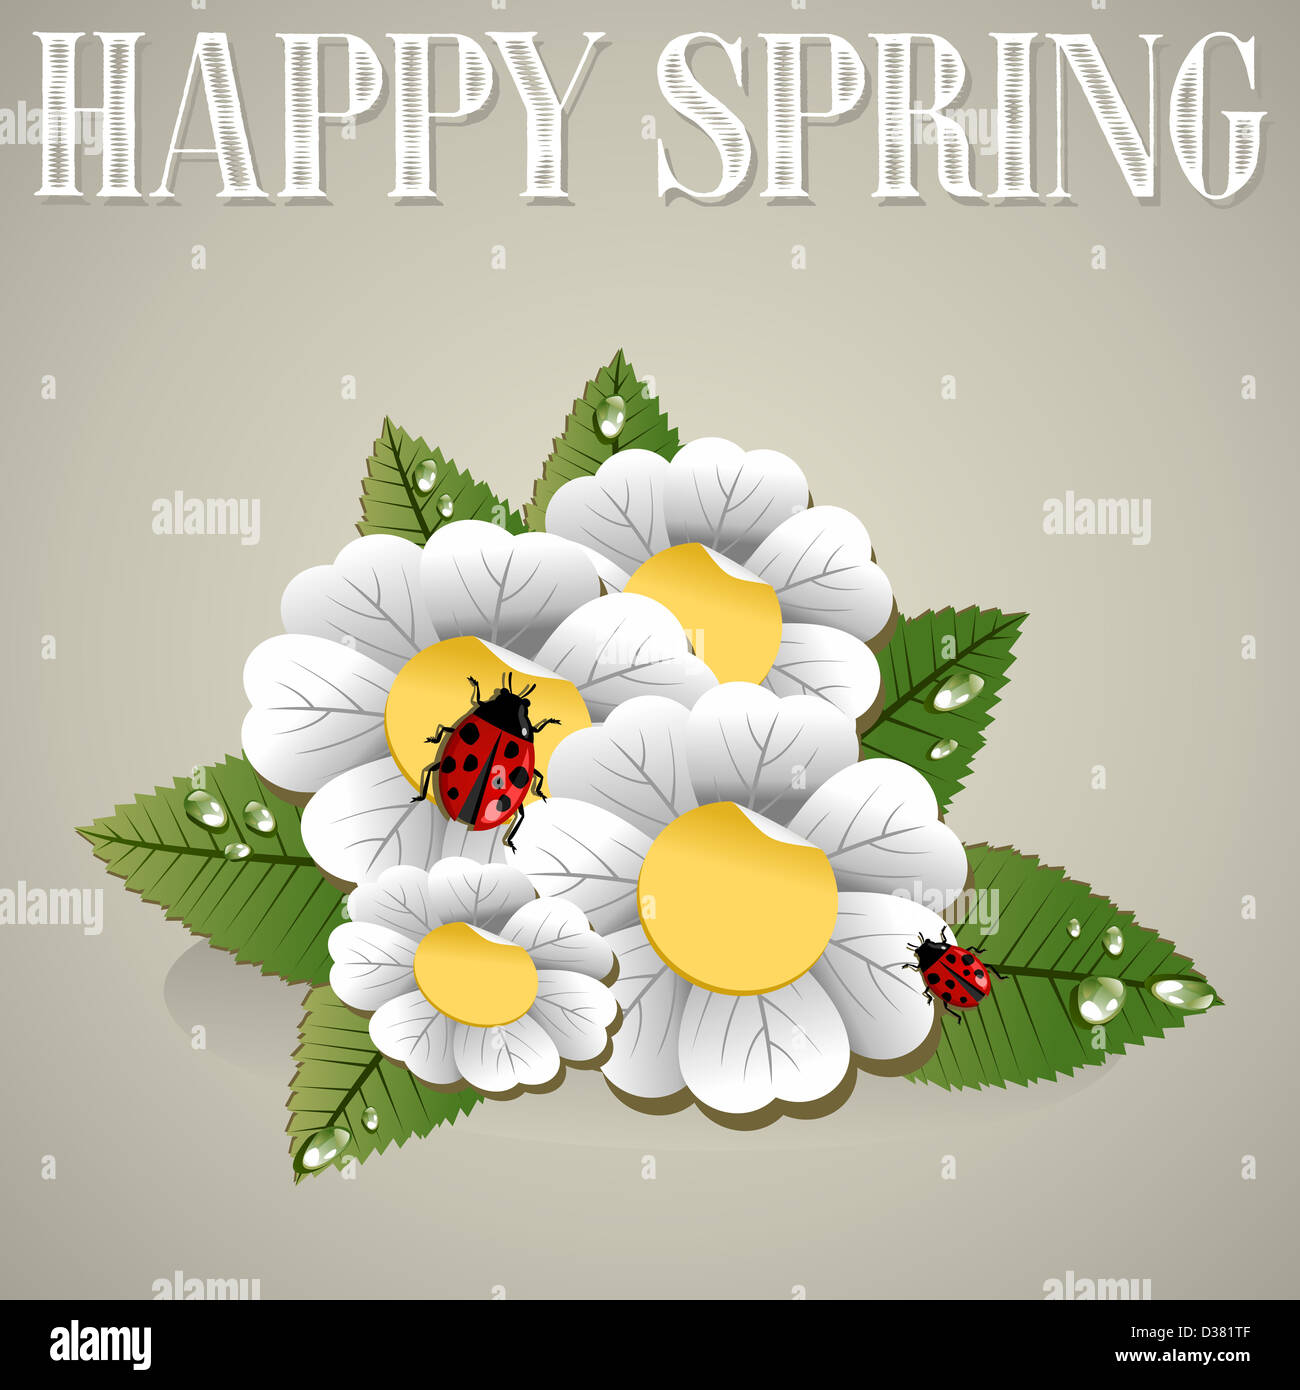 Happy spring composition with flowers, leaves and beetle. Vector file layered for easy manipulation and custom coloring. Stock Photo